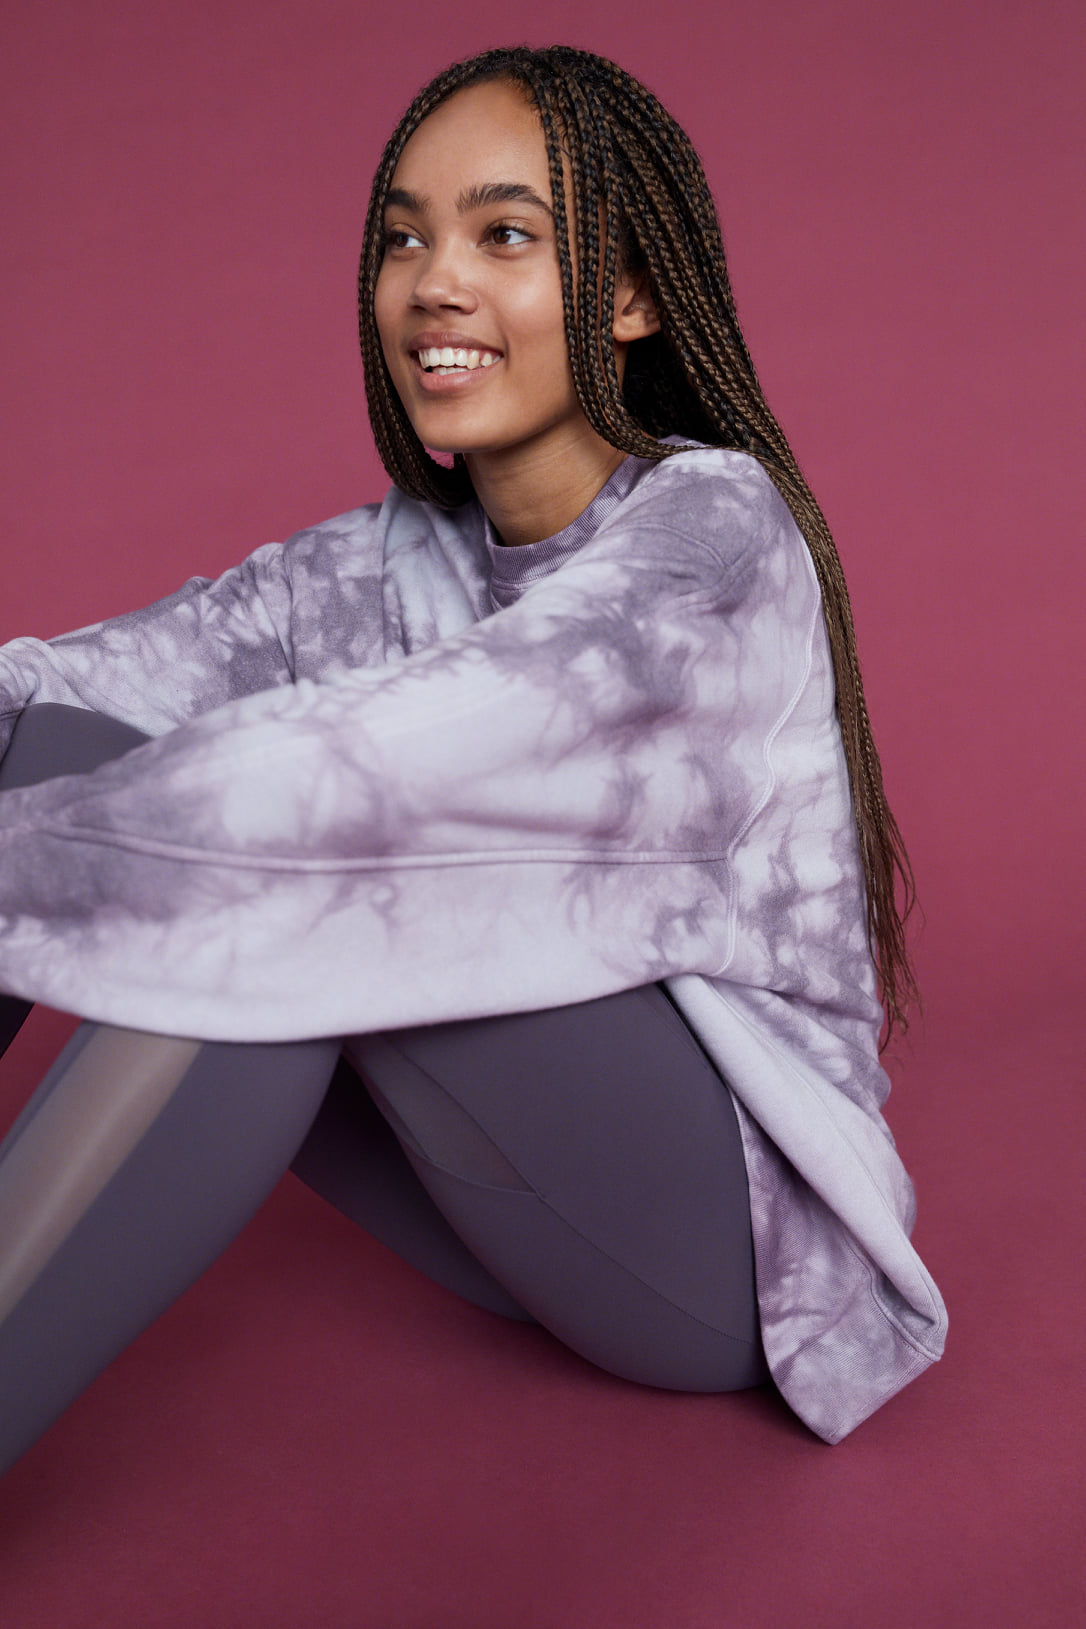 Mixing 2020 essentials: purple and tie dye. Are you in? 💜